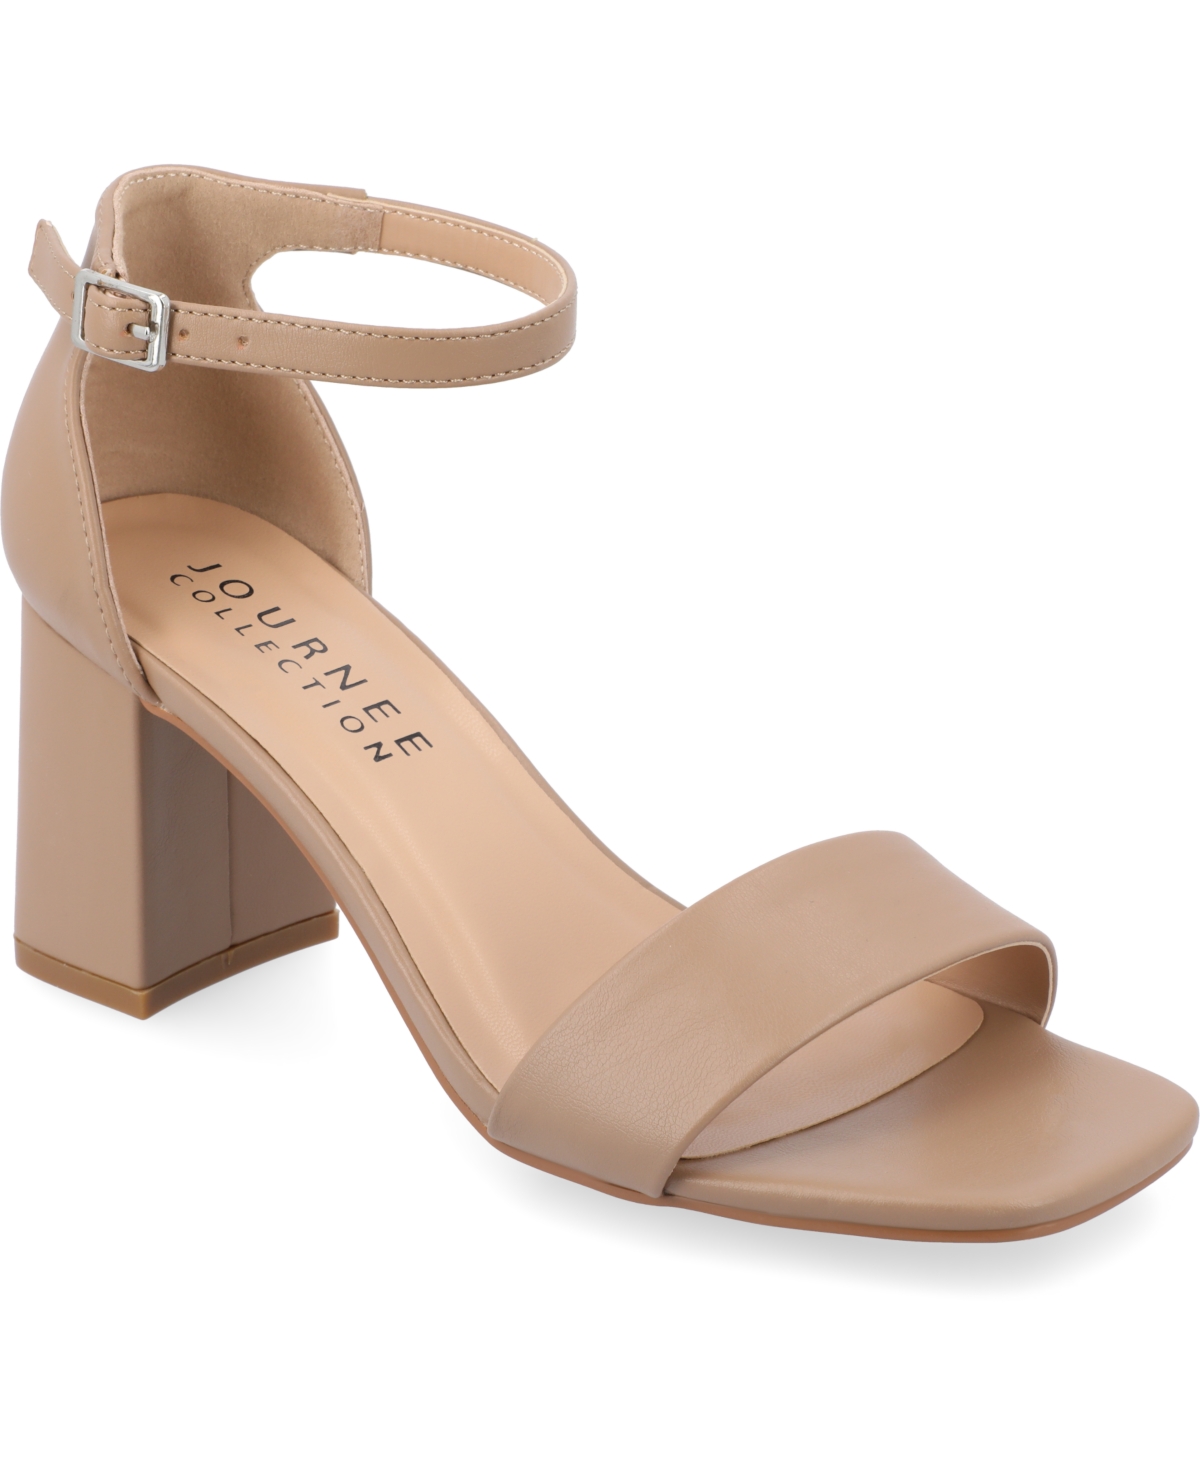 Journee Collection Valenncia Ankle Strap Sandal In Mocha